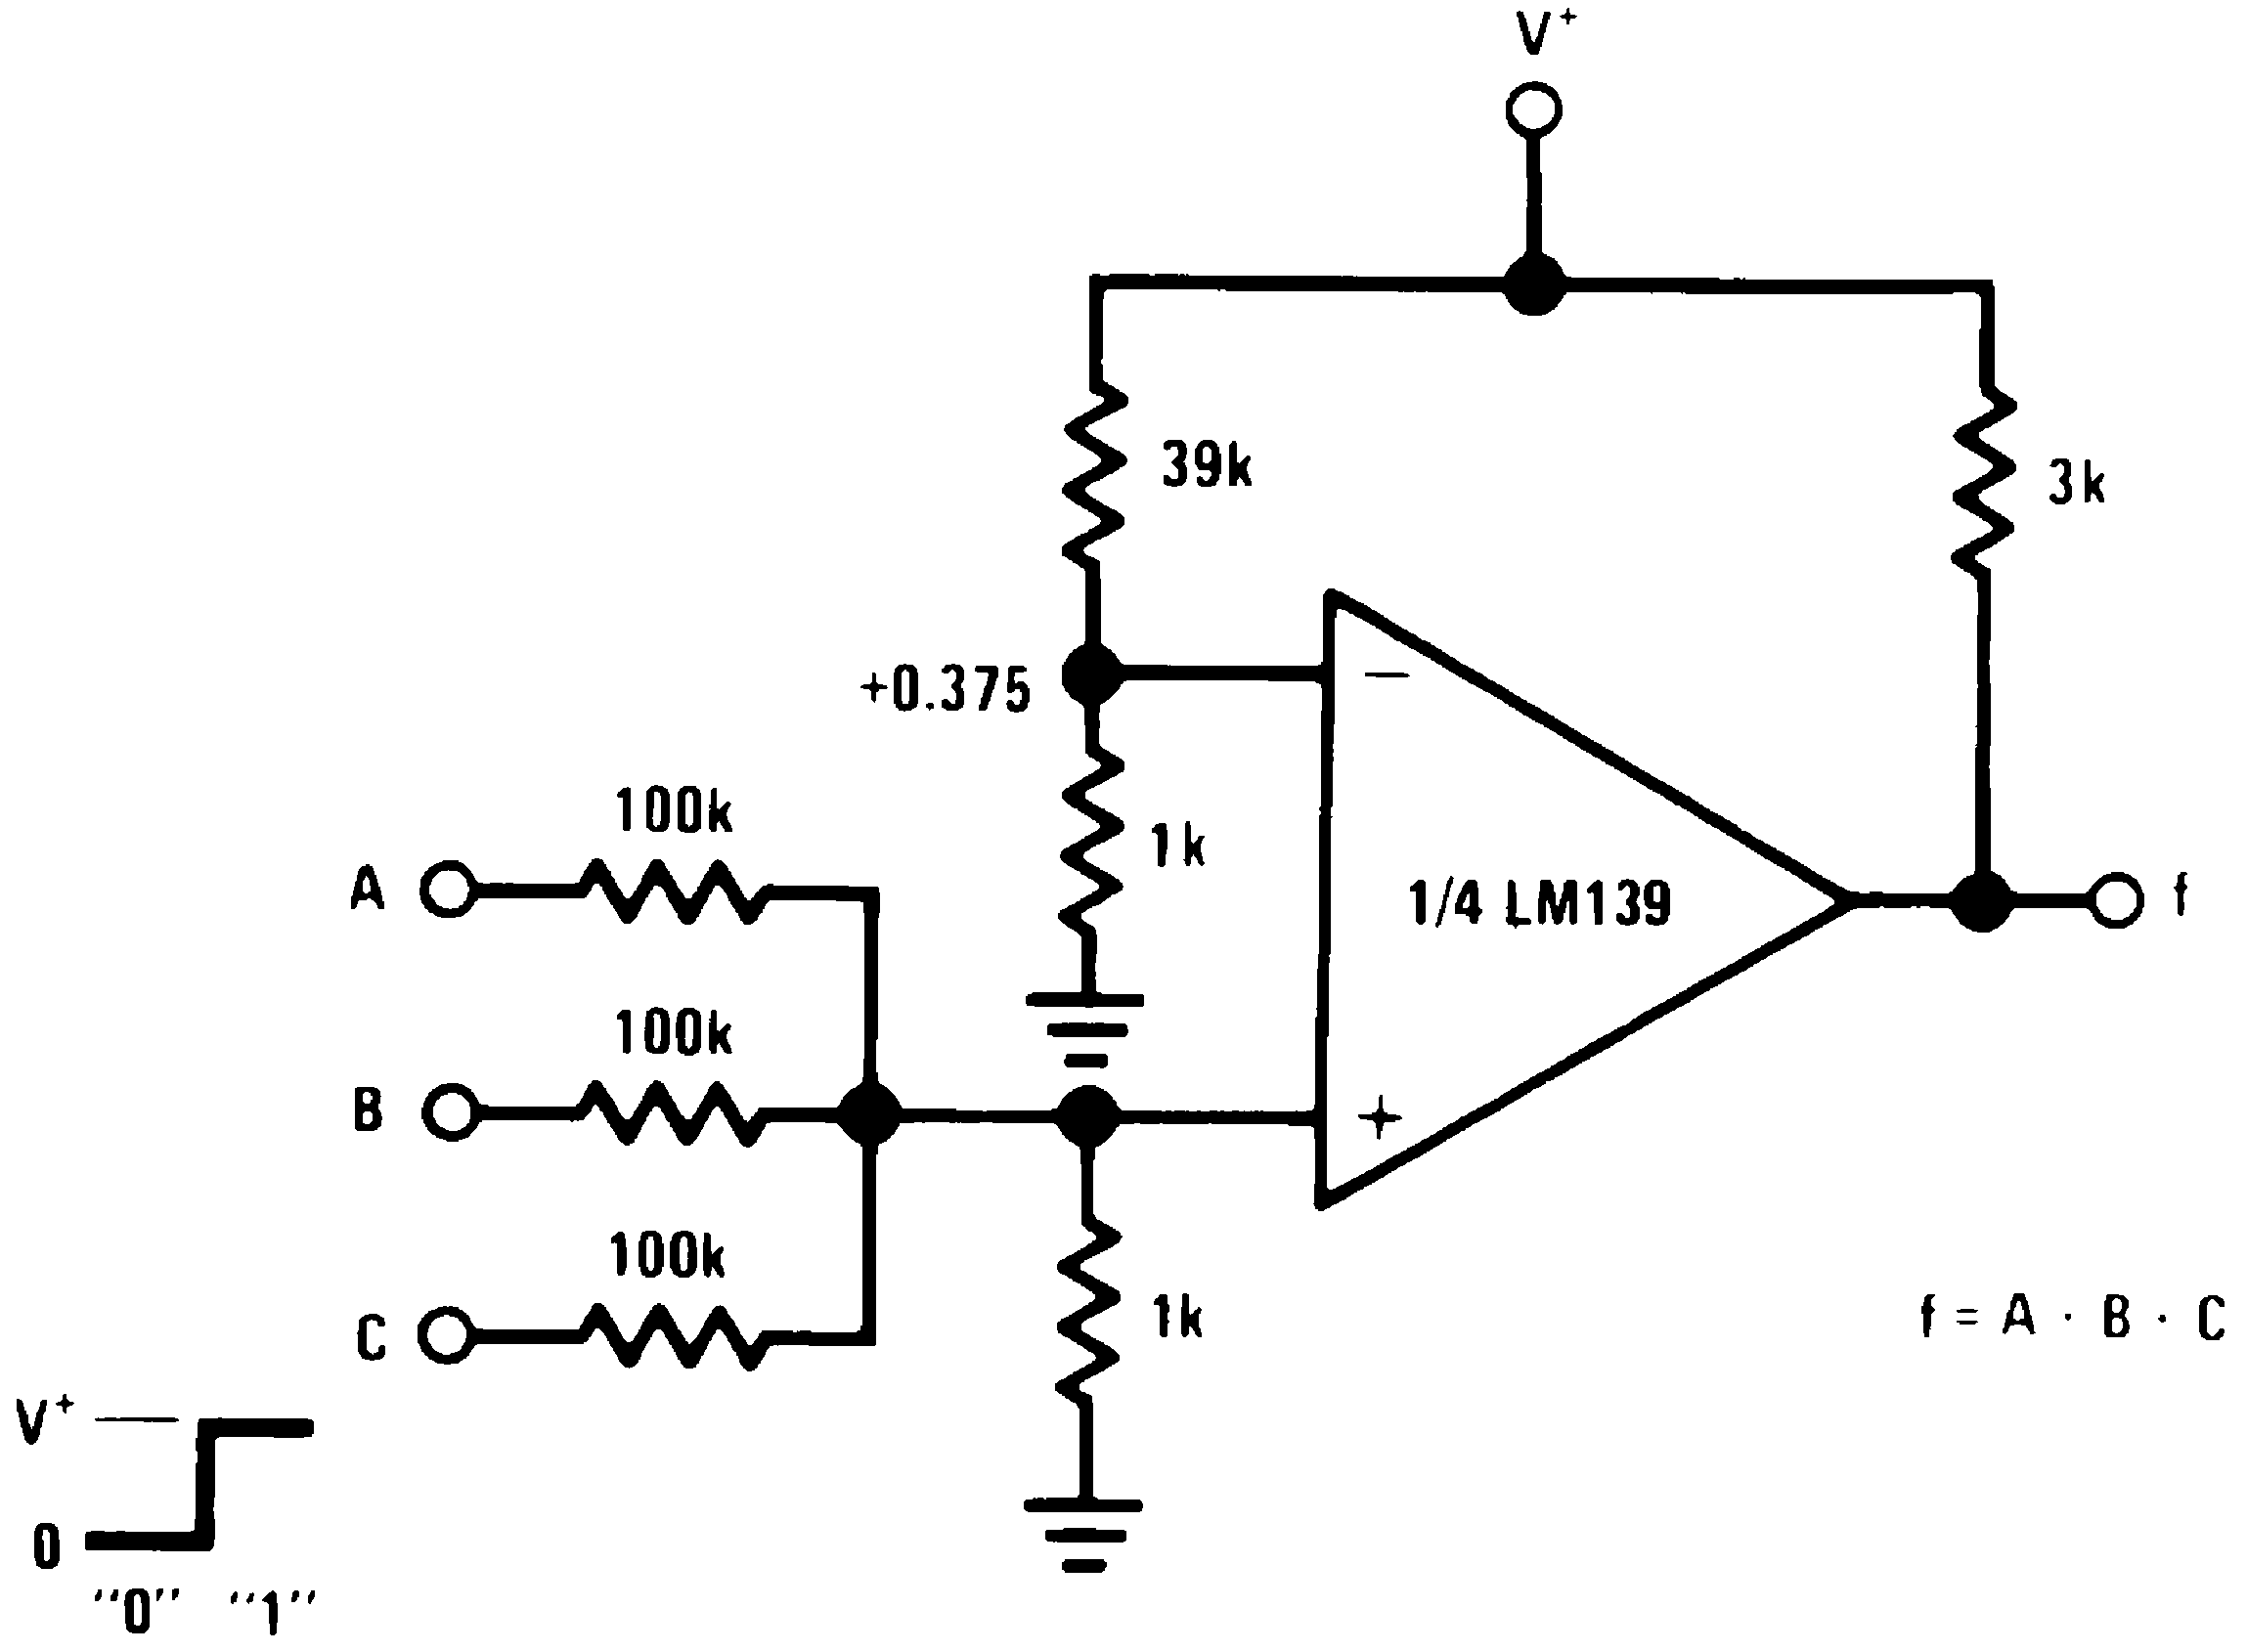 LM339-MIL lm339-mil-and-gate-schematic.png